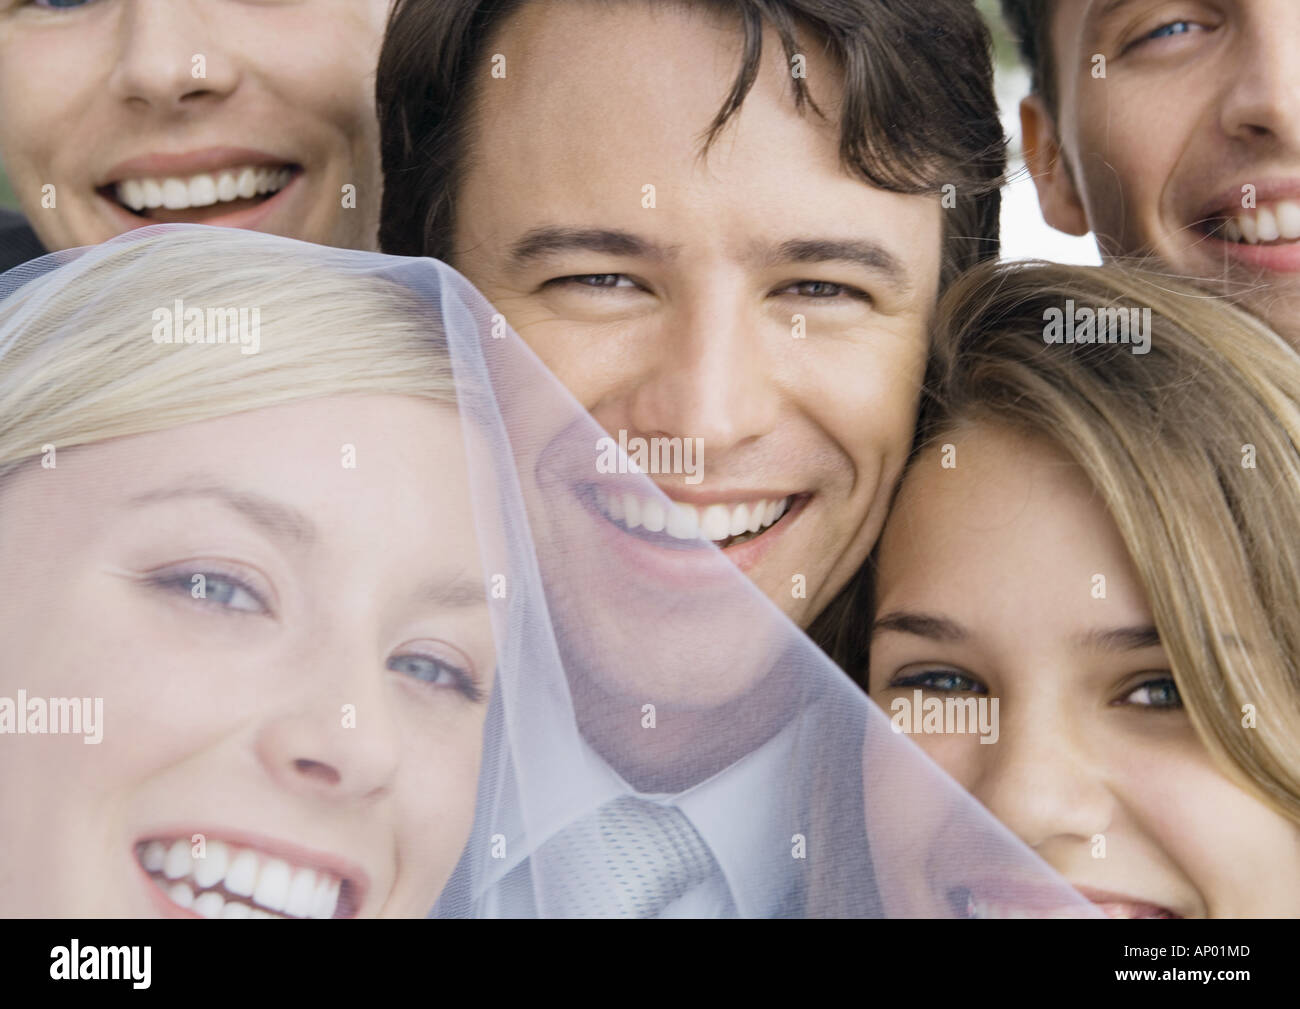 Bride and groom with friends, close-up of faces Stock Photo